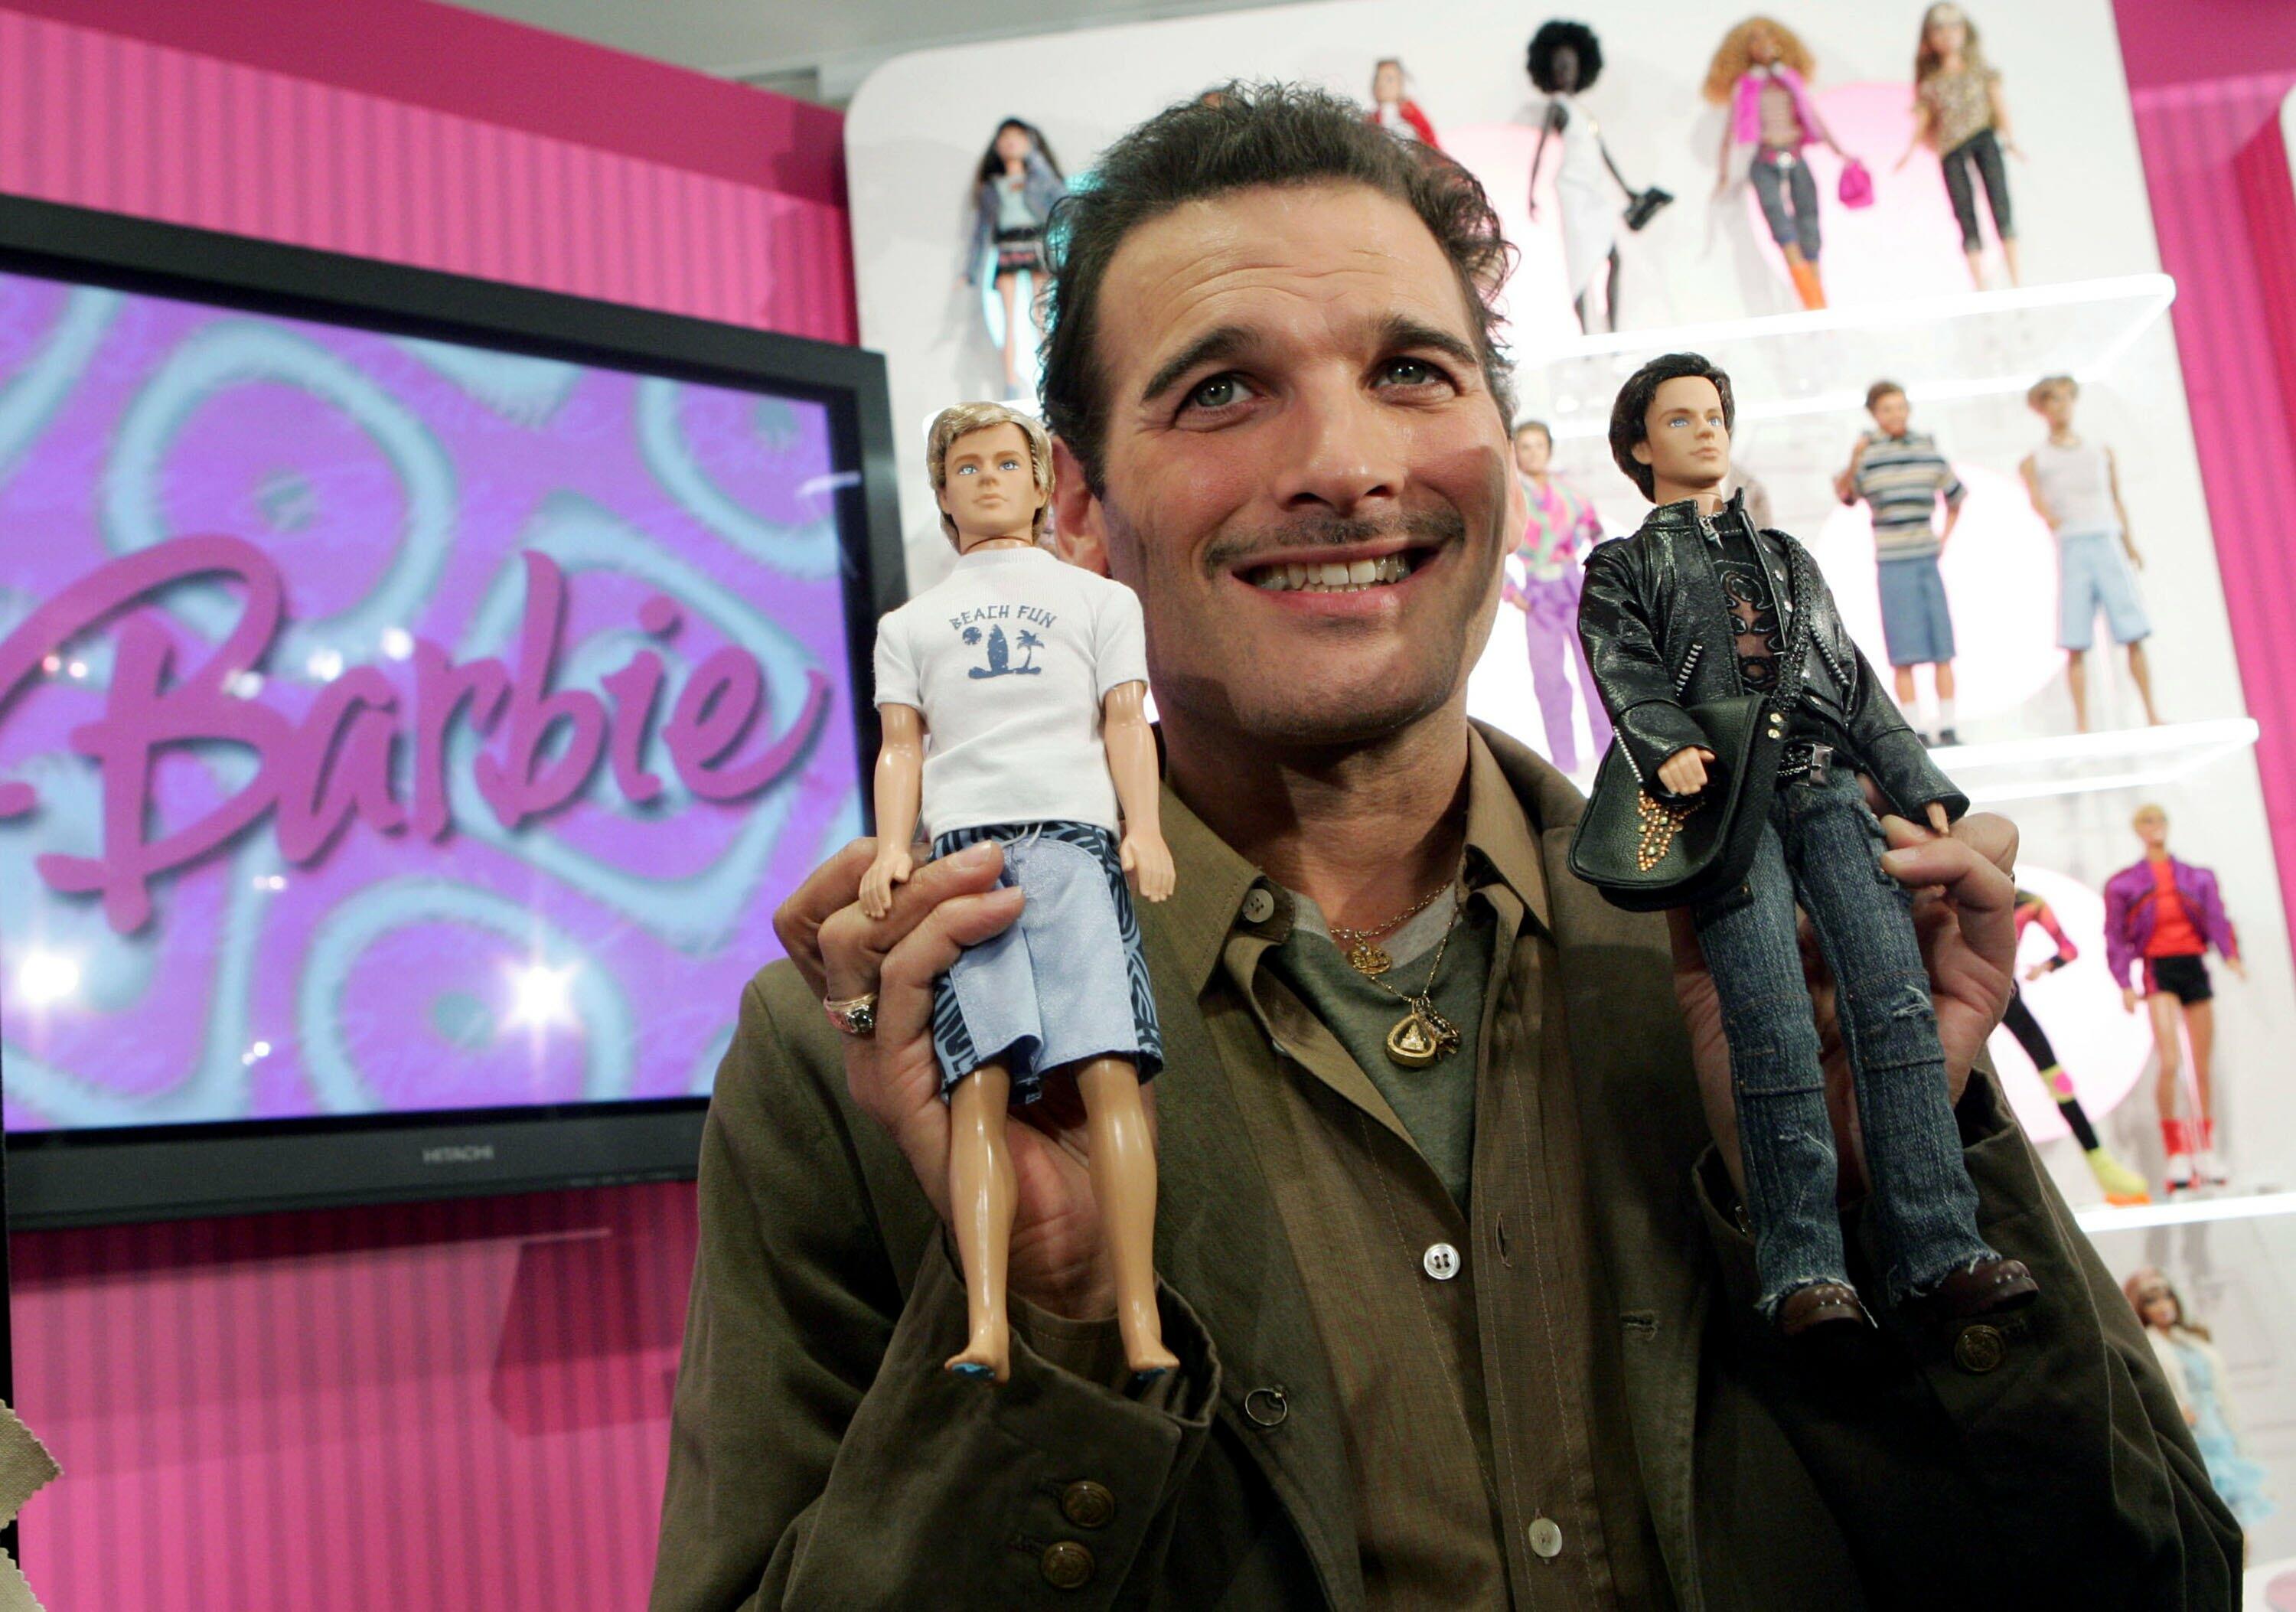 NEW YORK - FEBRUARY 9:  In this handout photo released by Mattel, celebrity stylist Phillip Bloch unveils the new Ken dolls February 9, 2006 in New York City. The doll at left, which will be available on March 1 nationwide, reflects Ken's beach boy roots.